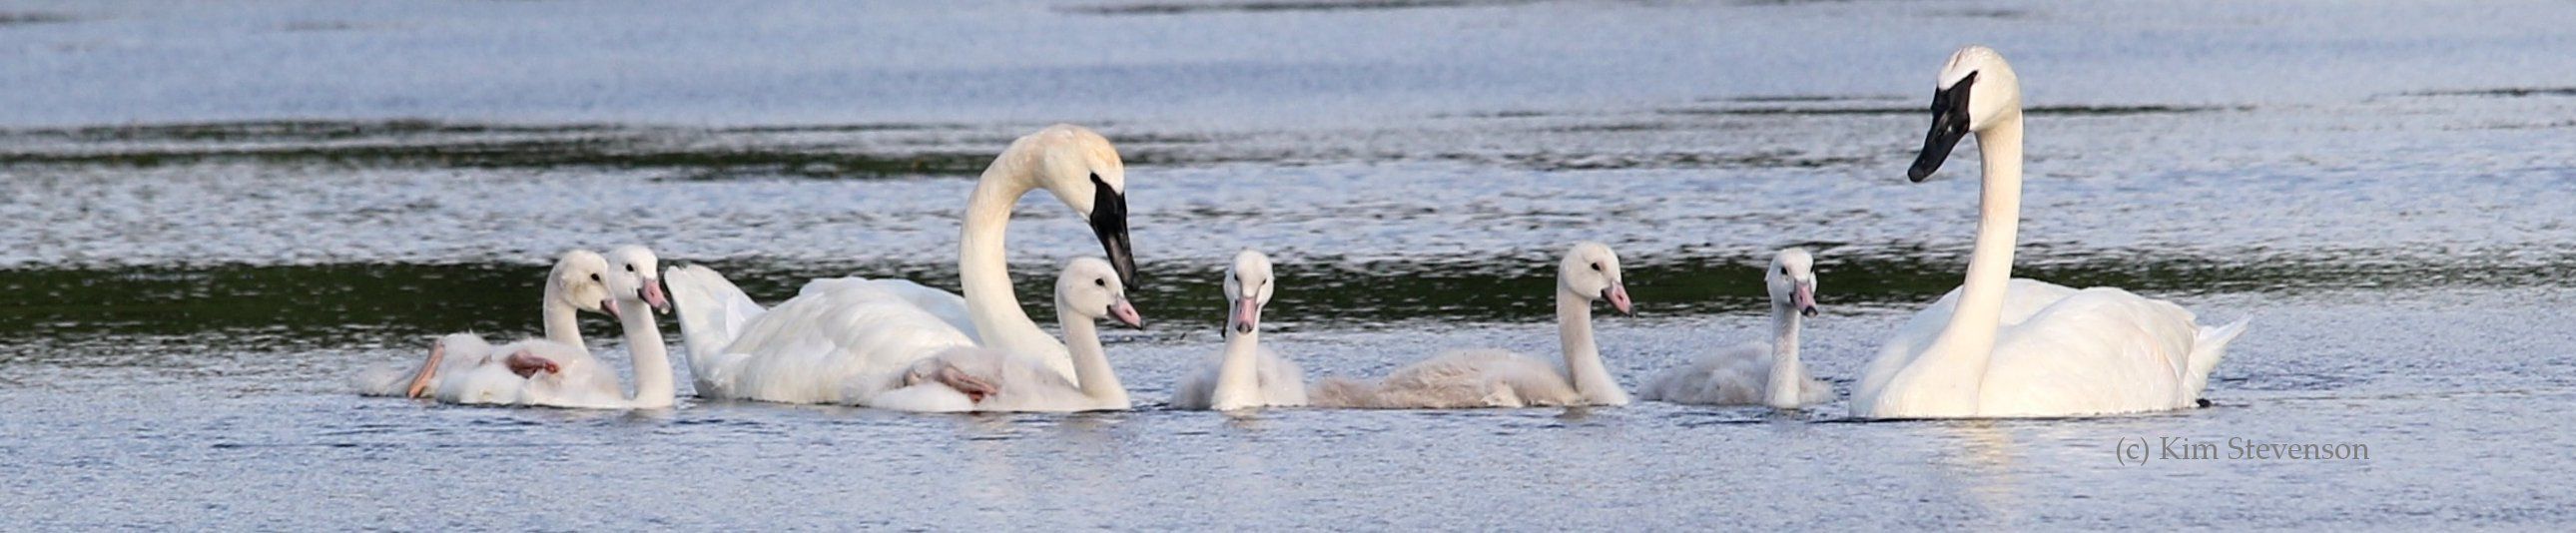 Your gifts of stock will be used to help swan conservation across North America